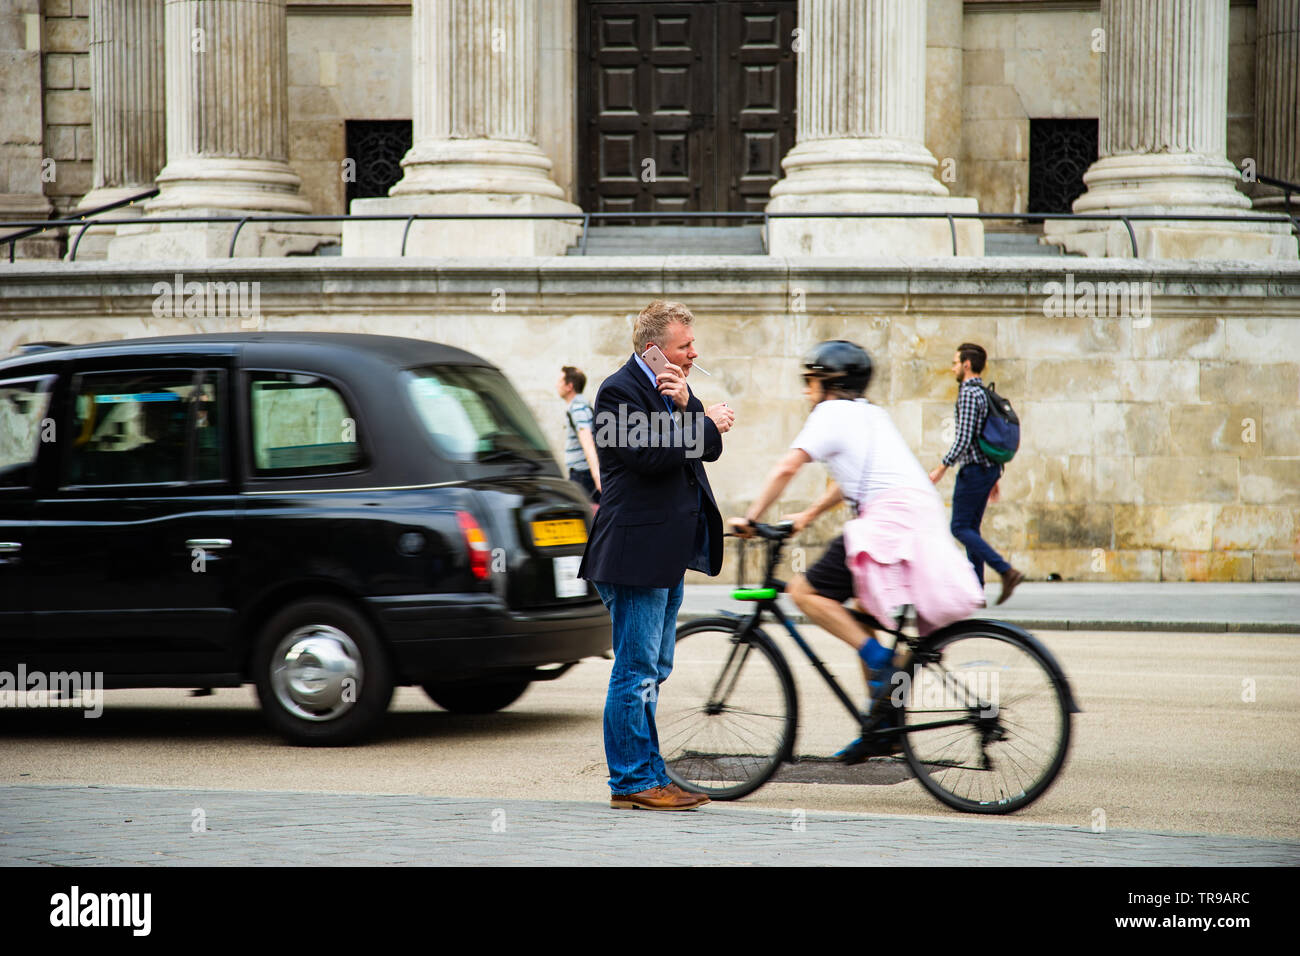 A man stands amidst the chaos in London so light up his cigarette while talking on his iPhone as a cyclist and black cab pass by Stock Photo